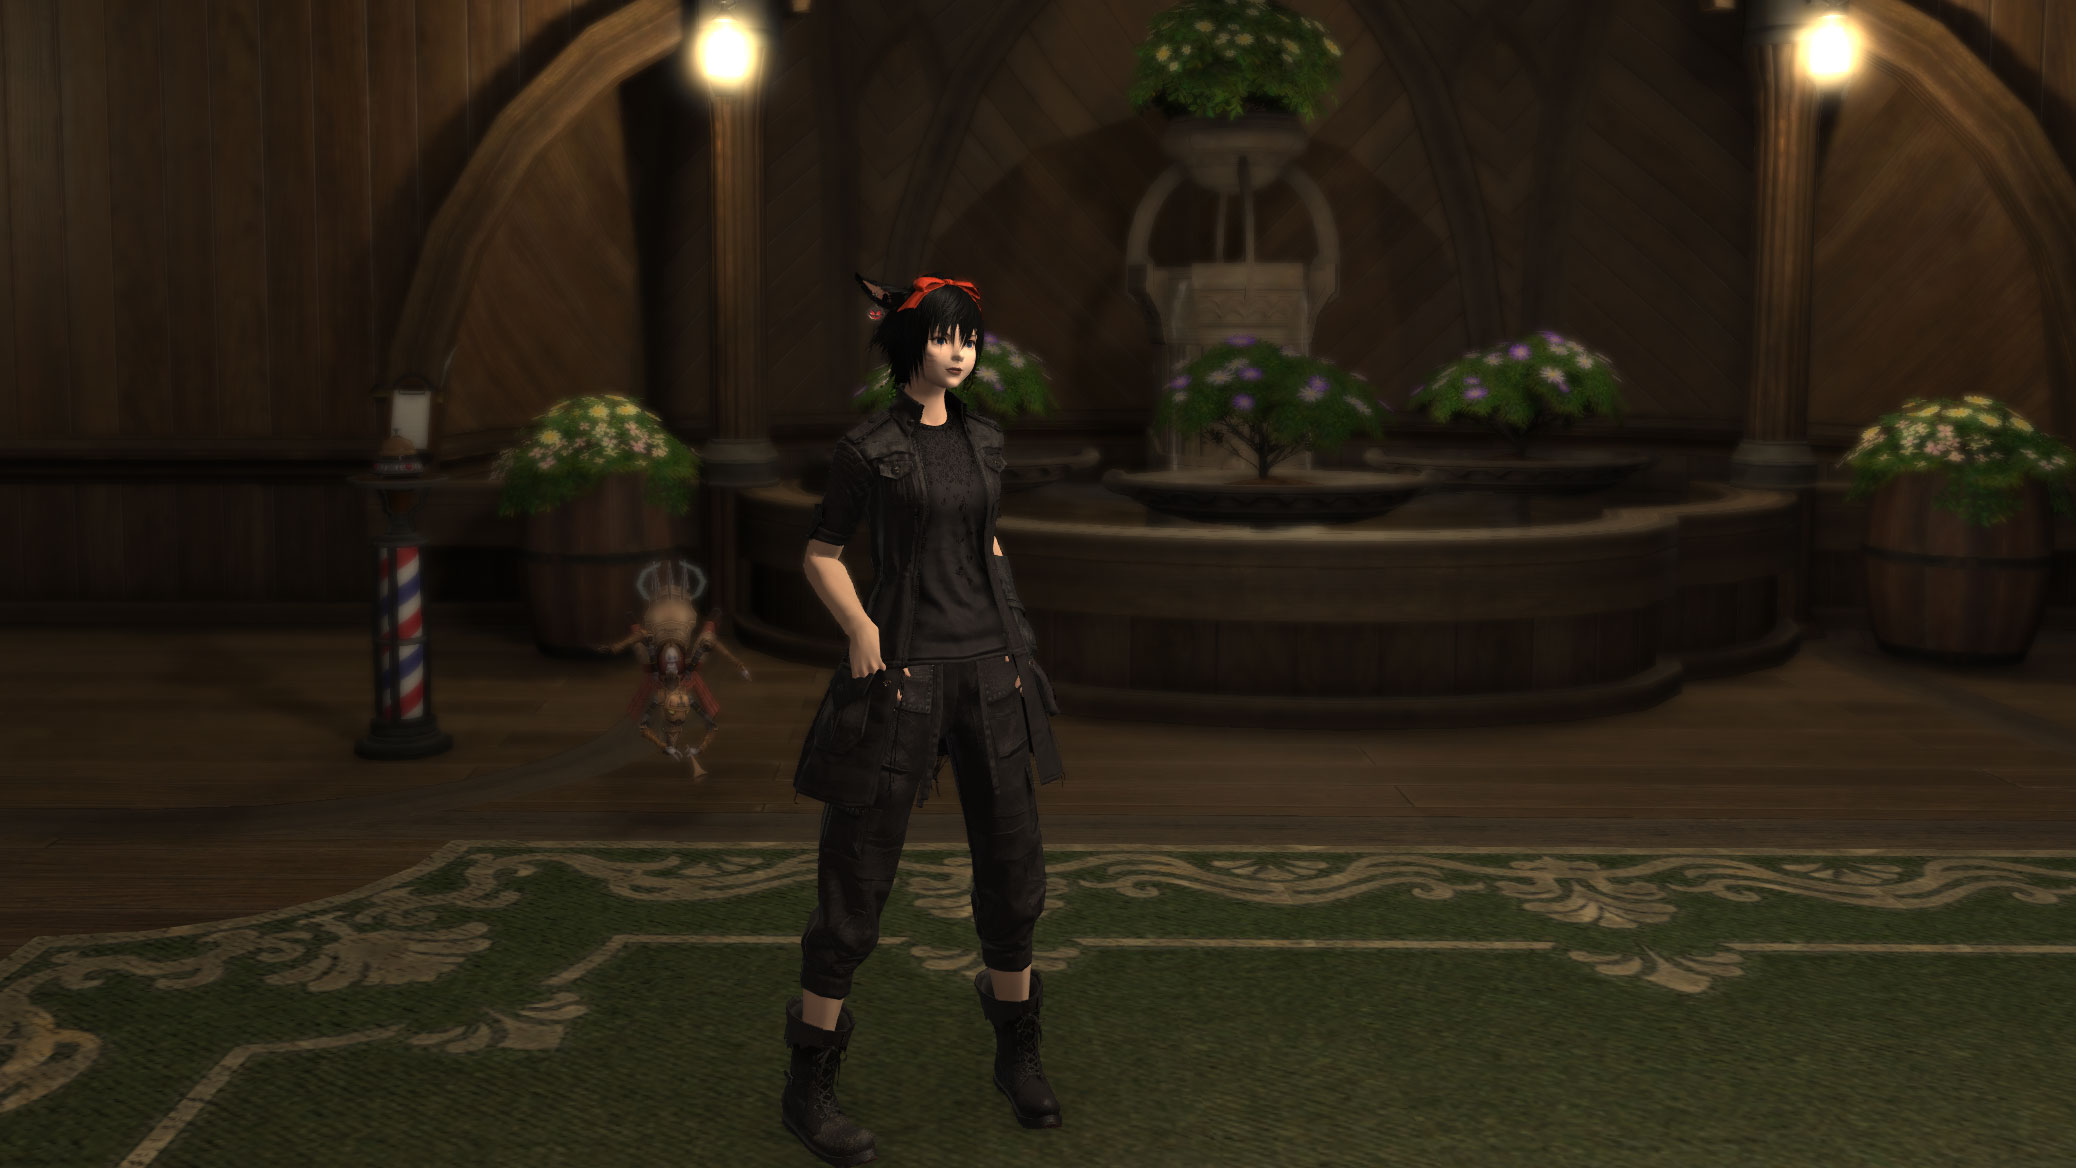 Final Fantasy XIV Jackie's warrior of light wearing Noctis' outfit and hairstyle